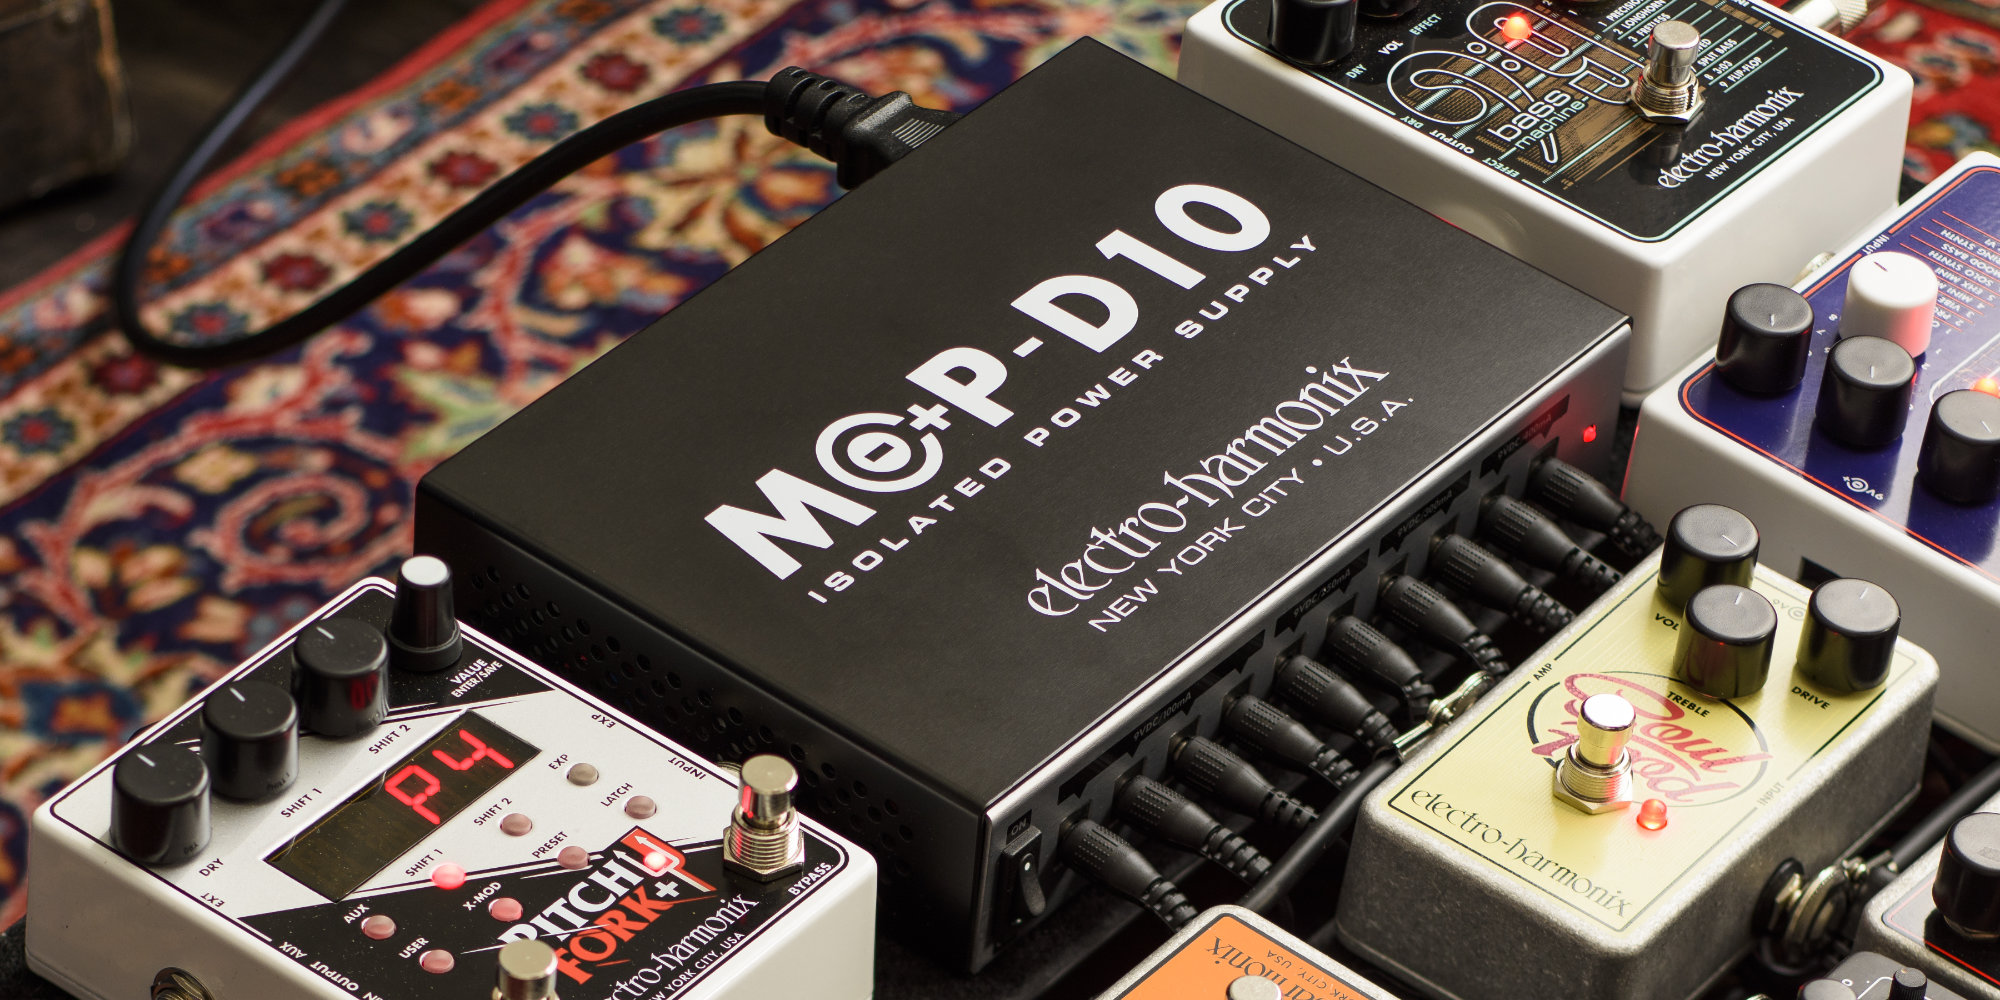 Mer information om "Electro-Harmonix introduces the MOP-D10 Isolated Multi-Output Power Supply"